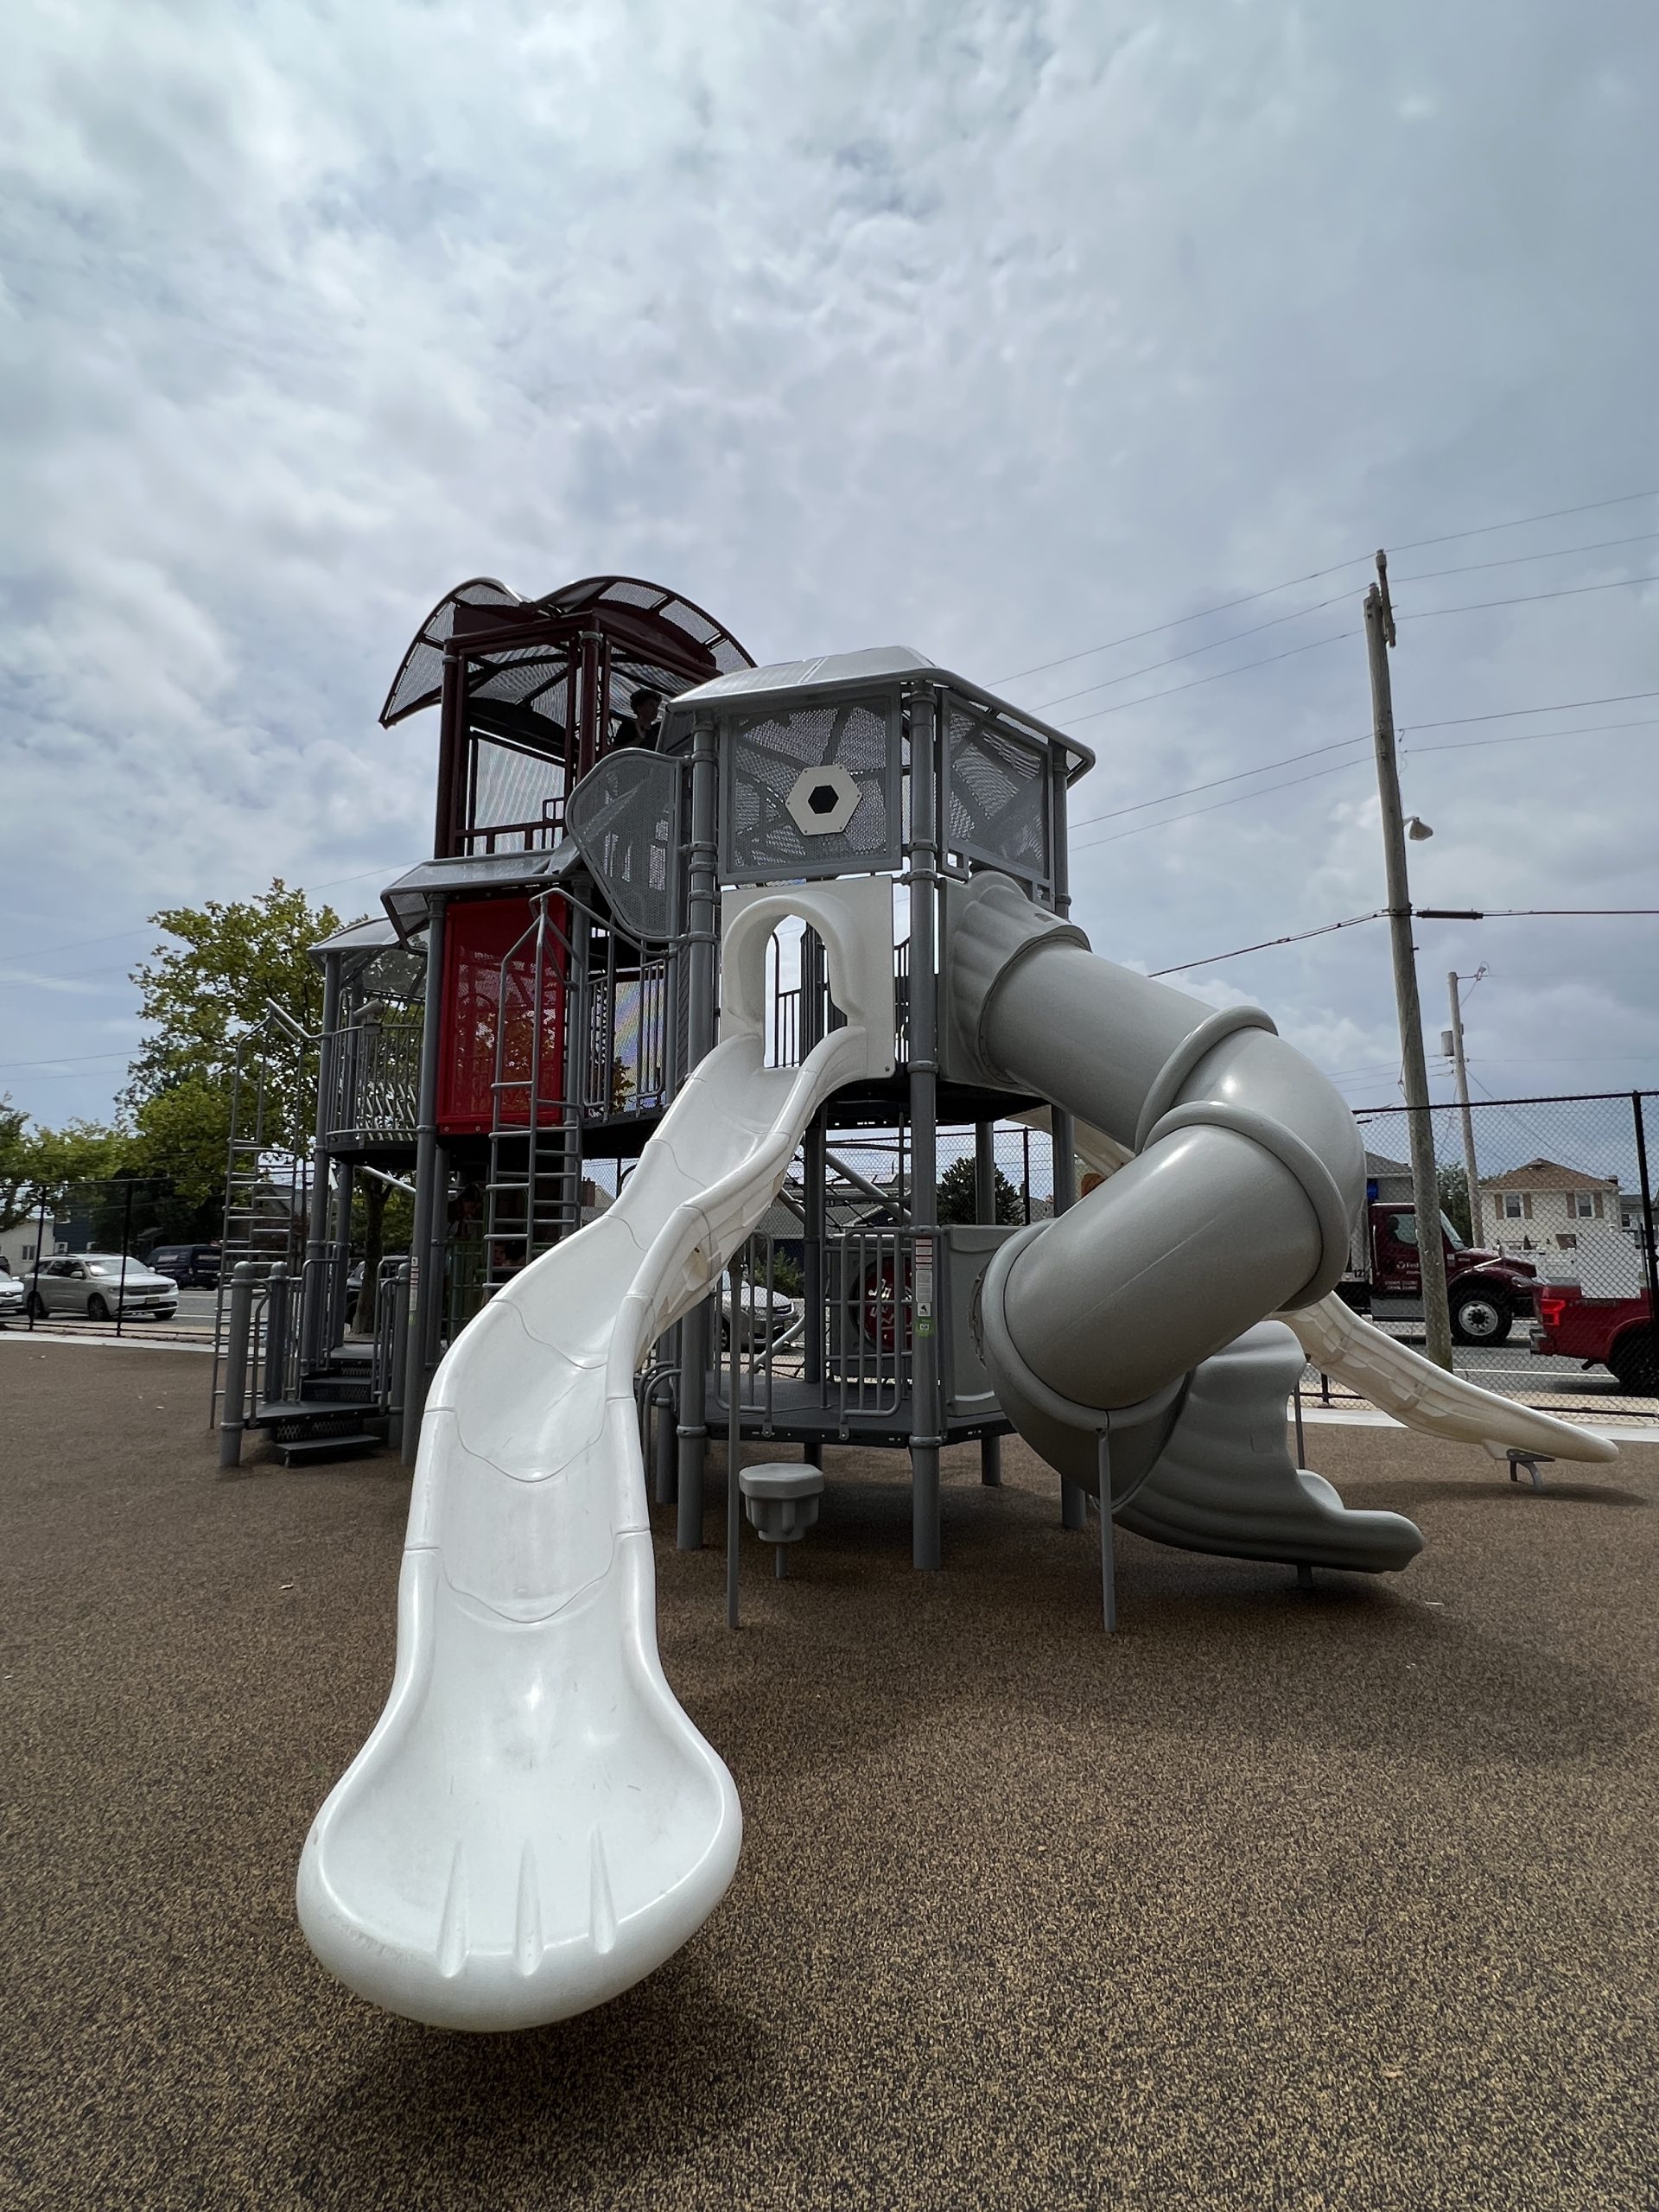 TALL - Slides on field side at Baby Lucy Playground in Margate NJ